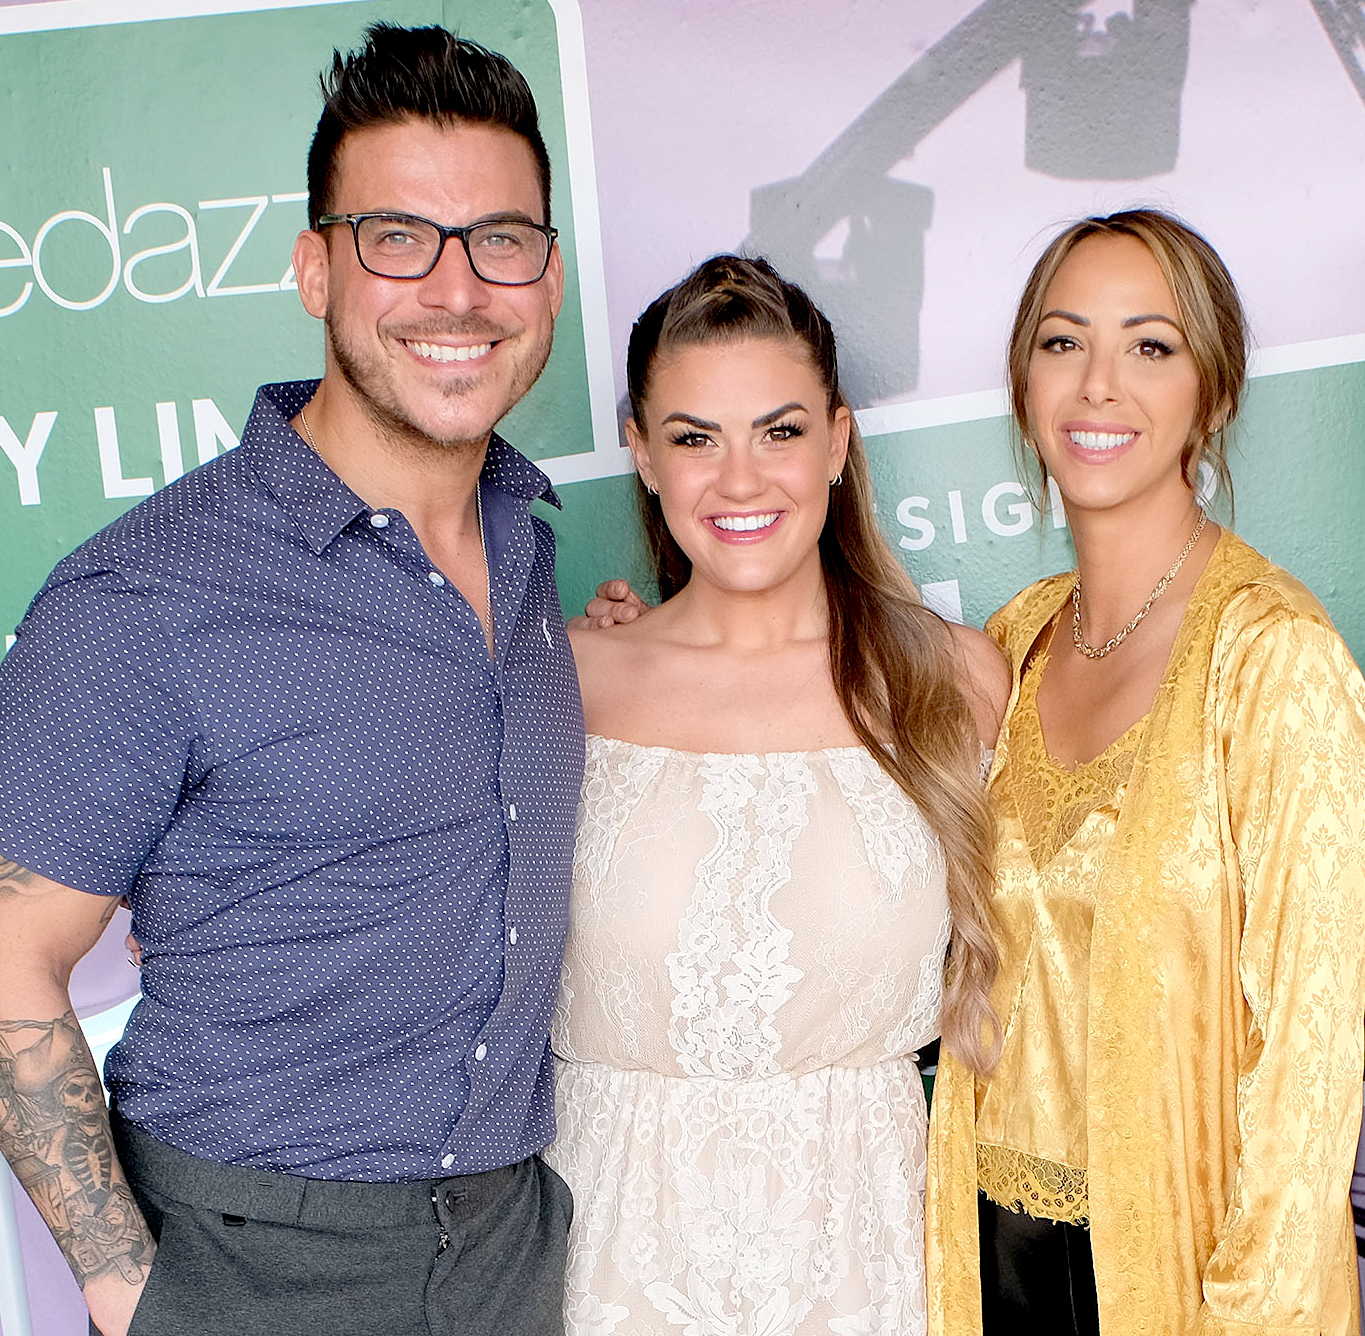 Kristen Doute Heads to Kentucky With Boyfriend Alex Menache to Visit Brittany Cartwright and Jax Taylor